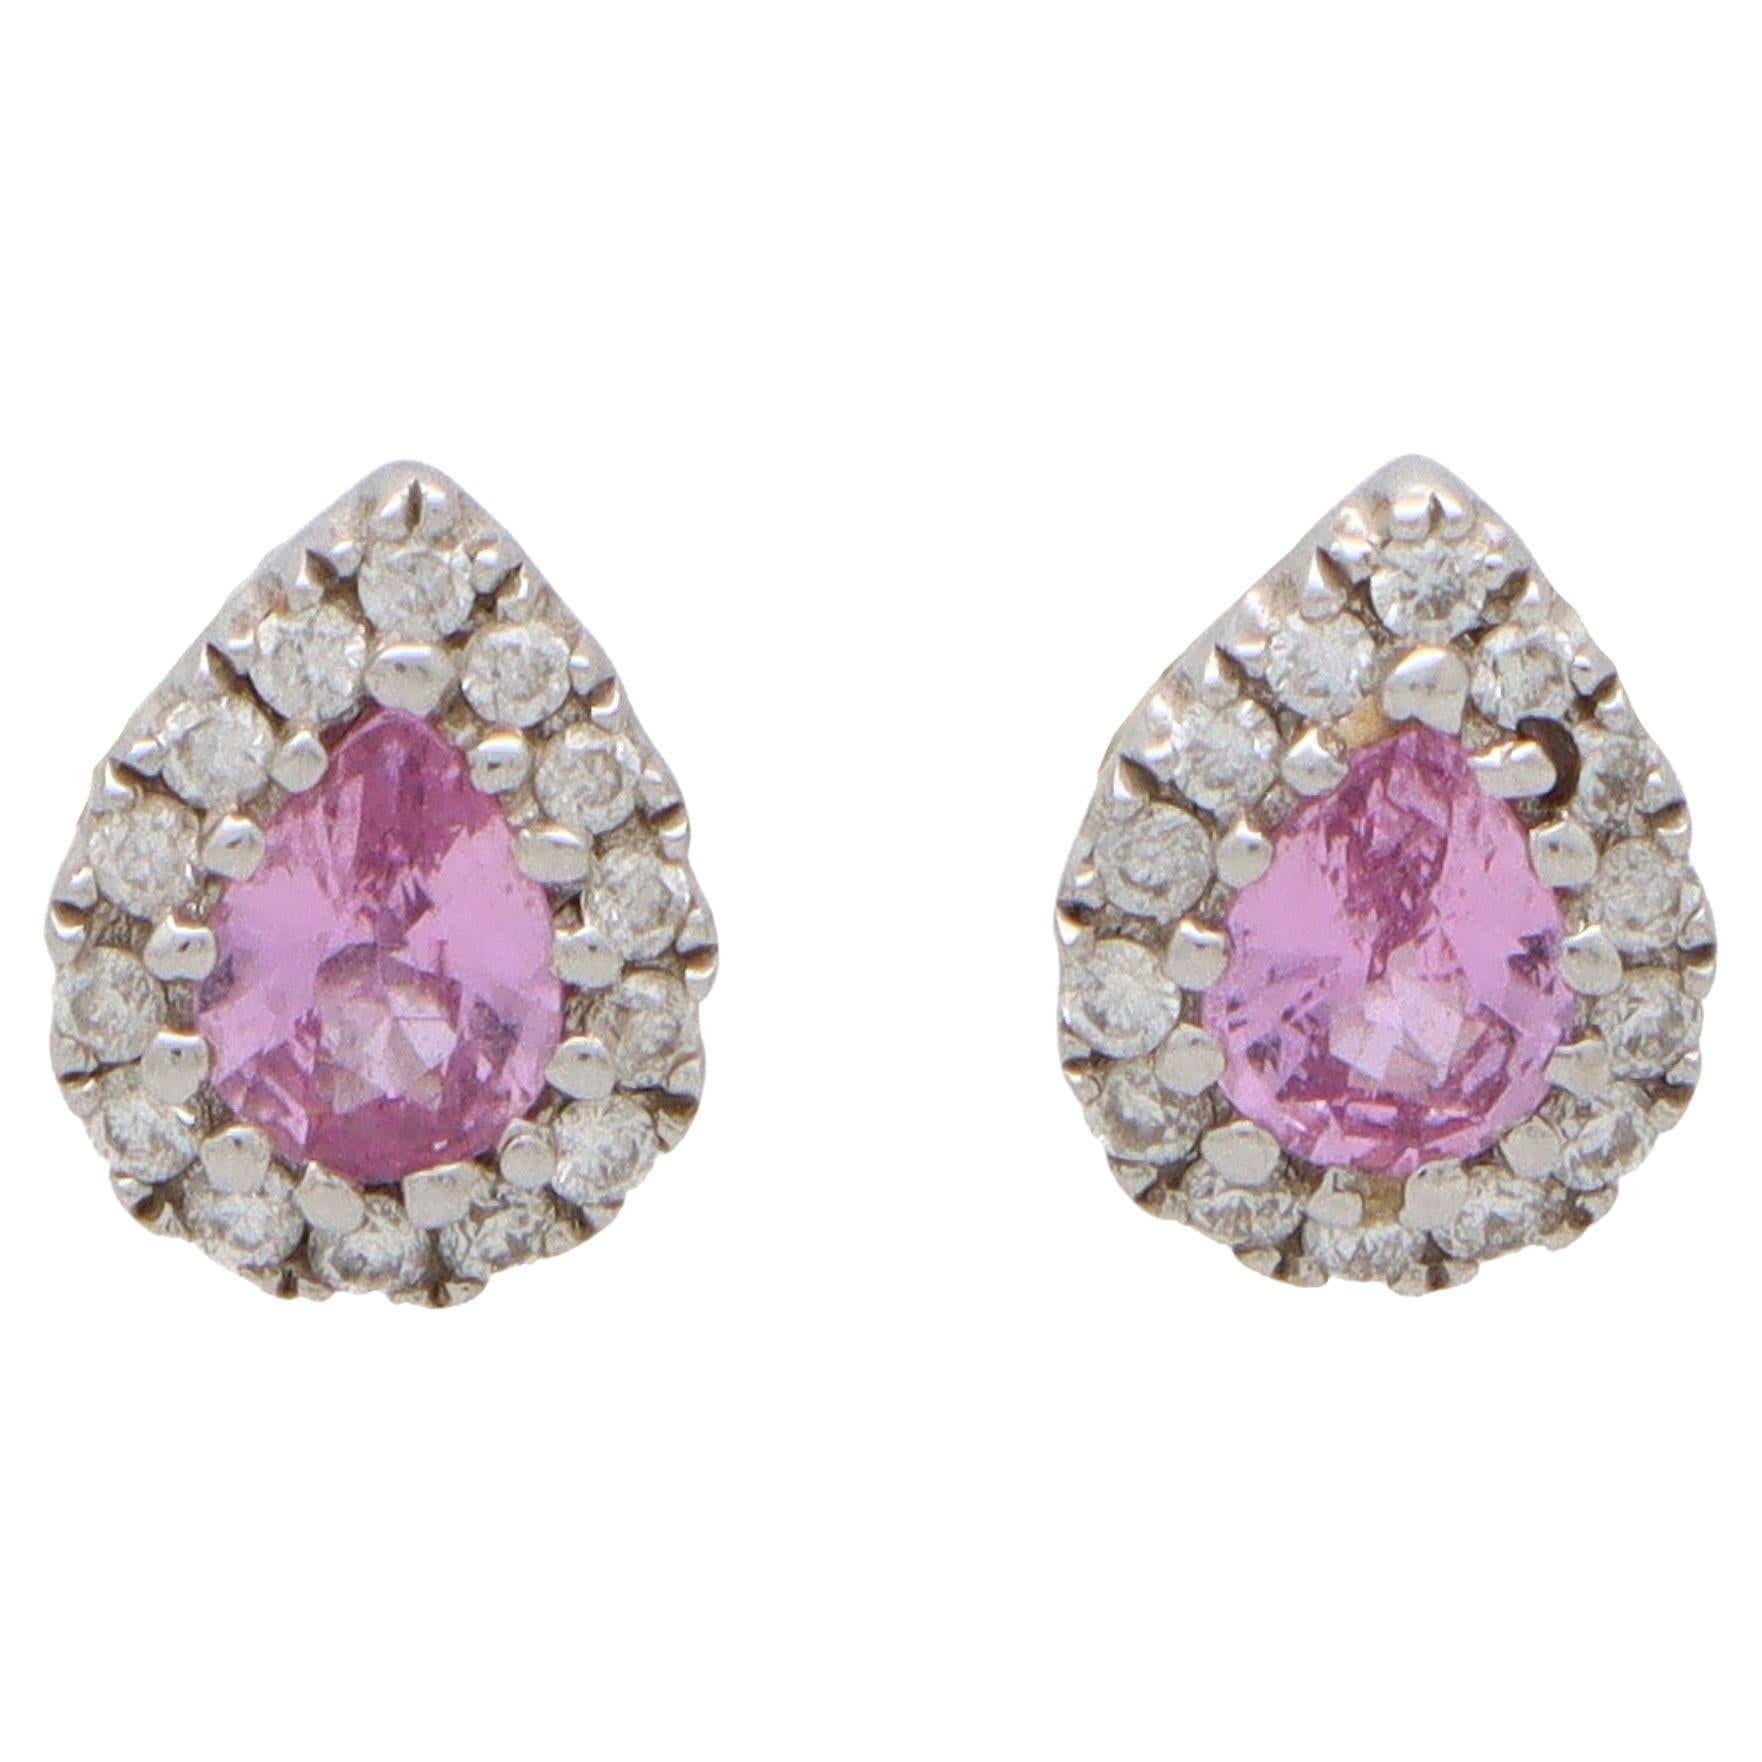 Vintage Pear Shaped Pastel Pink Sapphire and Diamond Earrings Set in 18k Gold